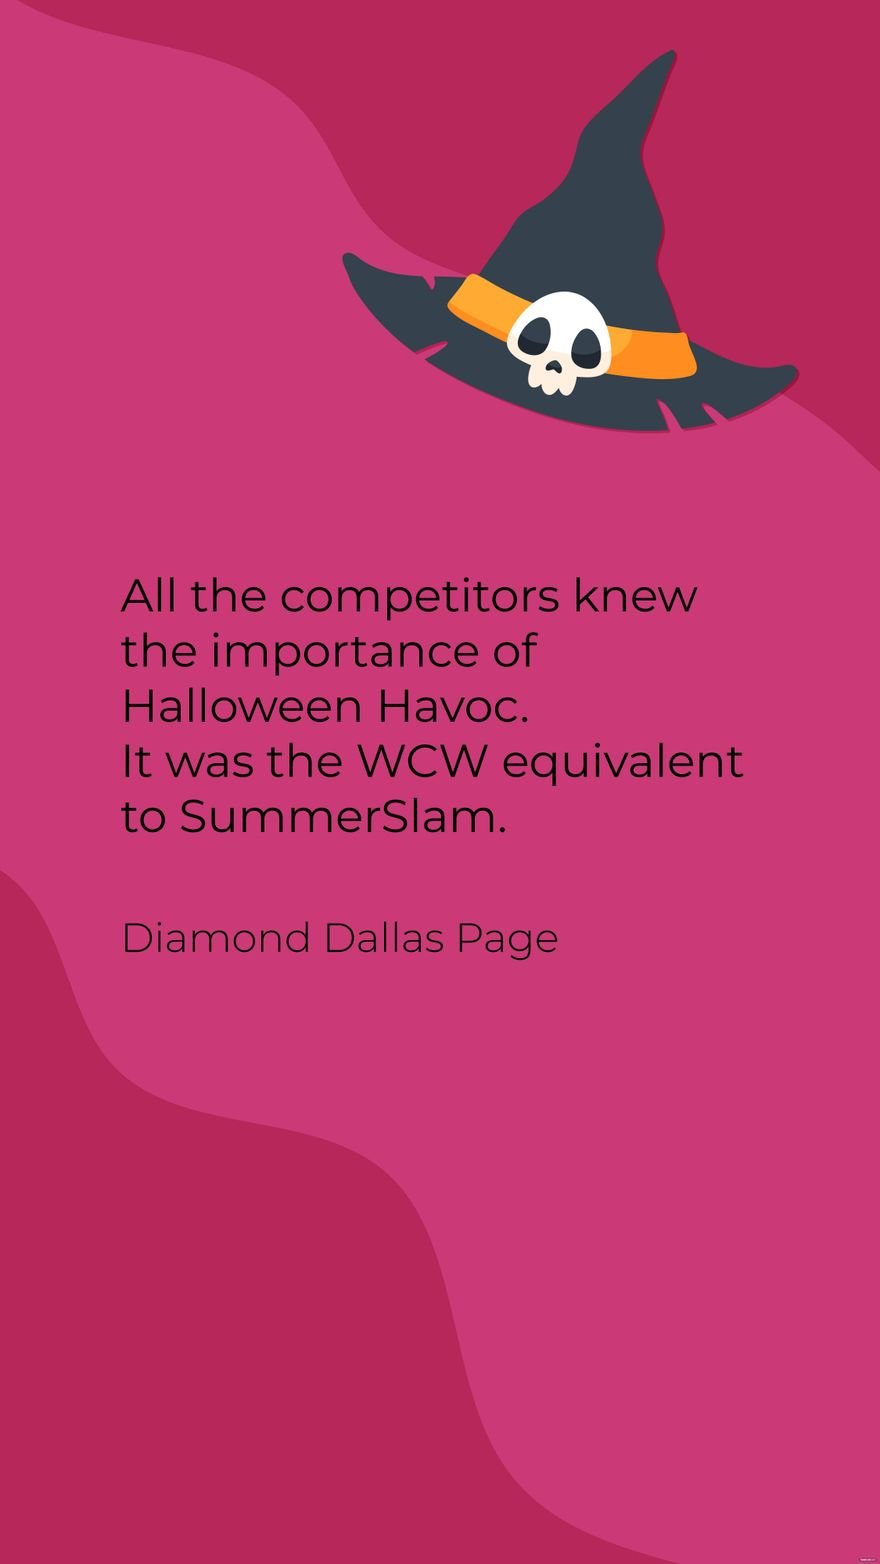 Free Diamond Dallas Page- All the competitors knew the importance of Halloween Havoc. It was the WCW equivalent to SummerSlam.